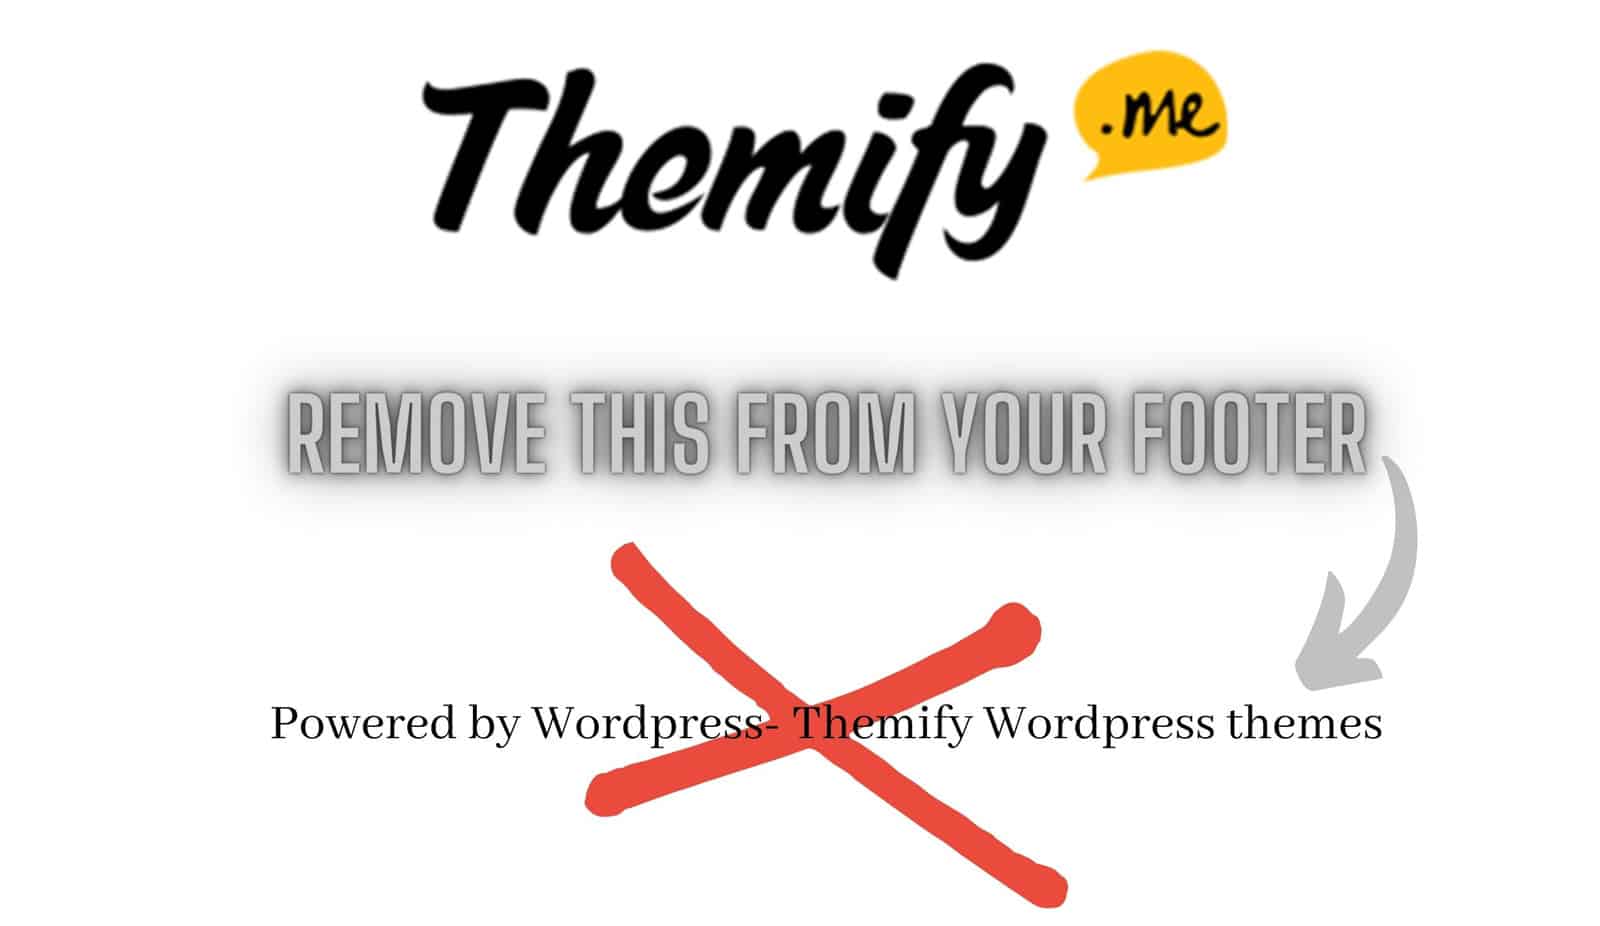 How to remove powered by wordpress from your footer in Themify Ultra.